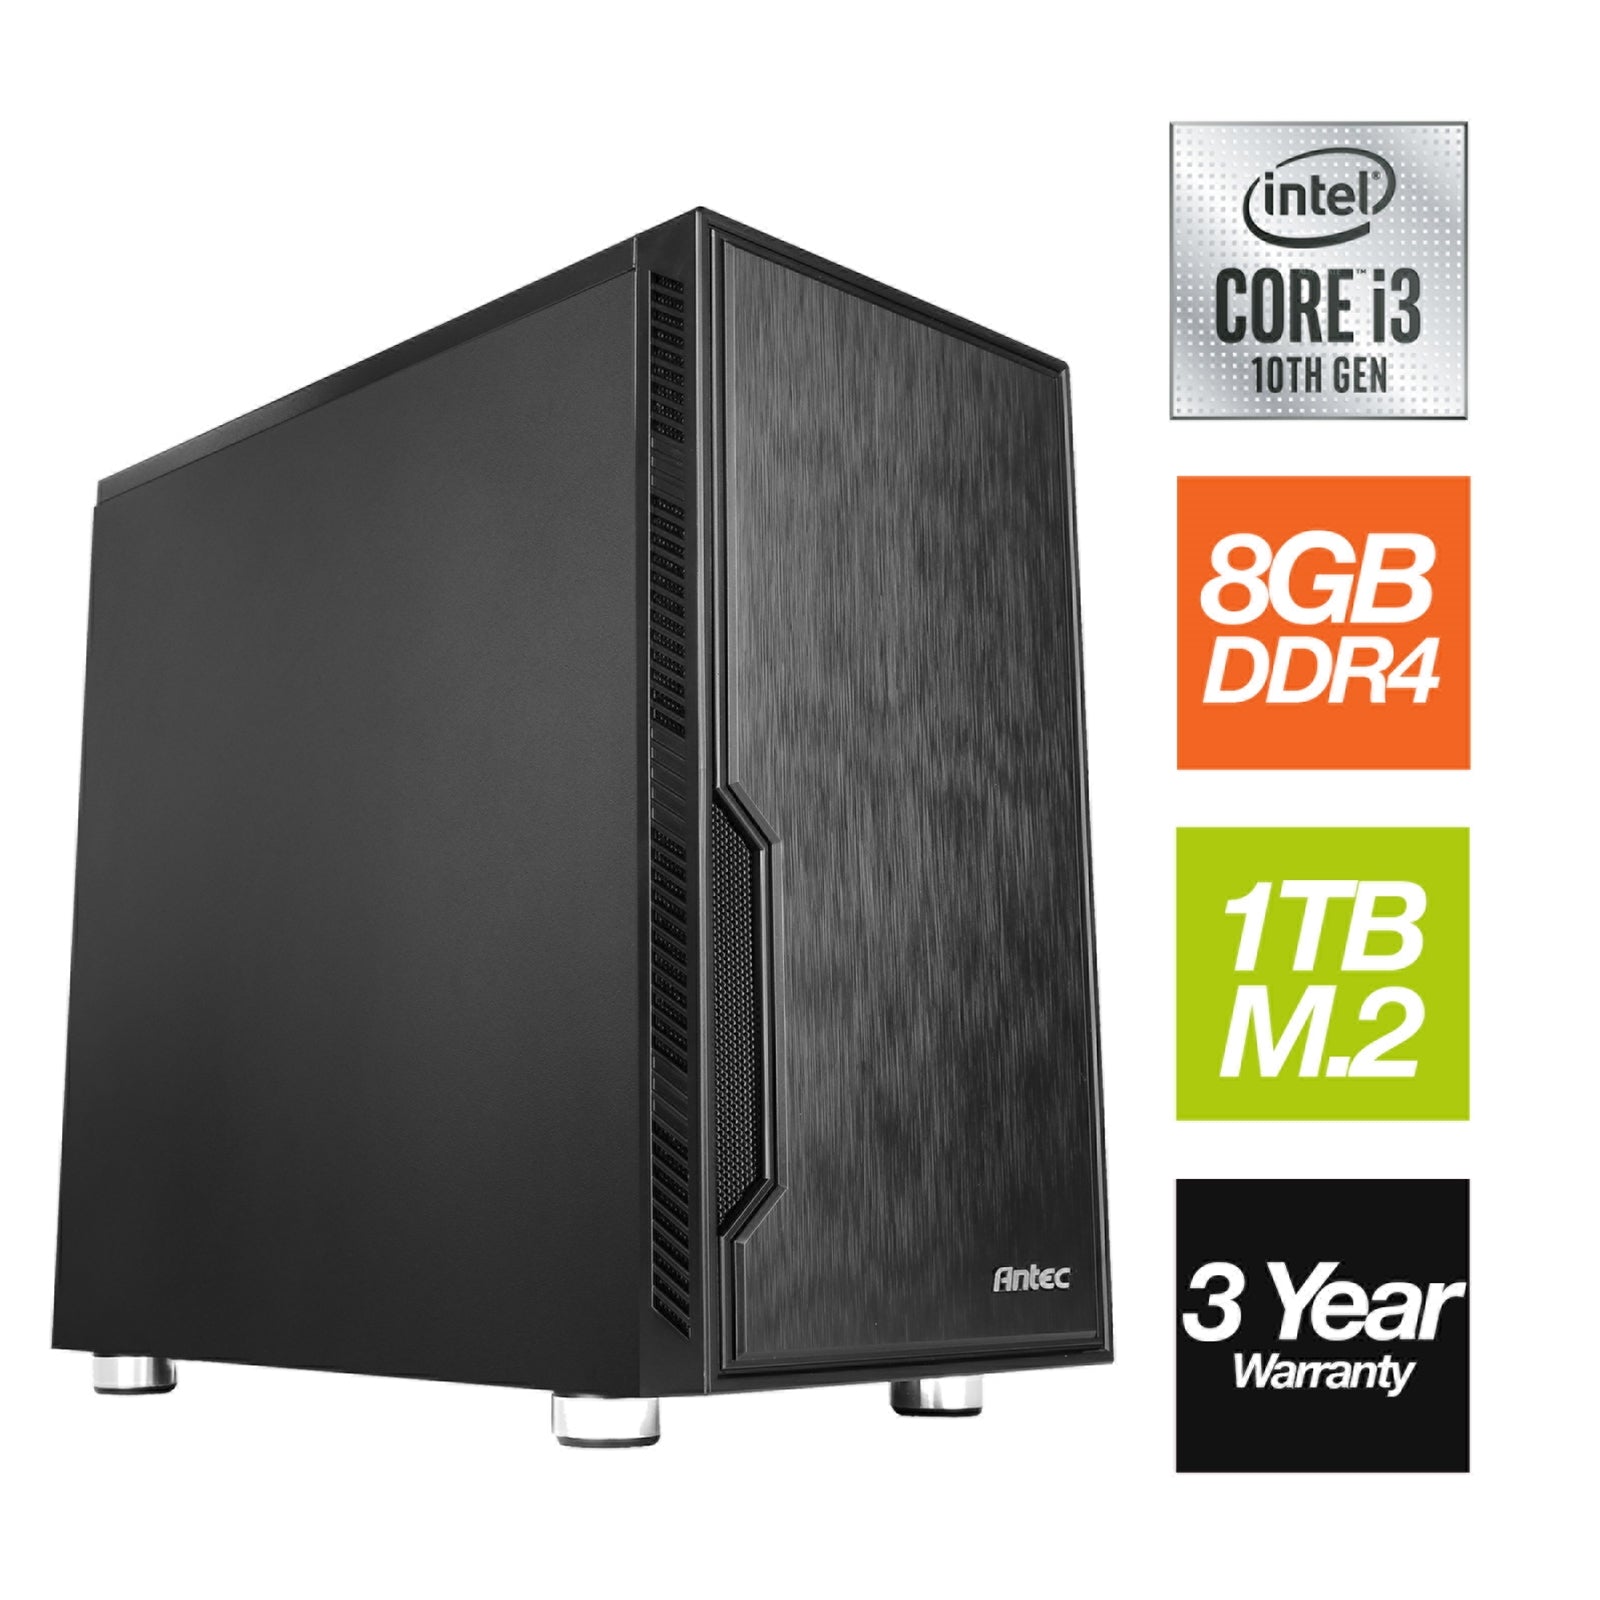 Intel i3-10100 Quad Core 8 Threads 3.60GHz (4.30GHz Boost) CPU, 8GB DDR4 RAM, 1TB NVMe M.2, Antec VSK Chassis - Pre-Built PC